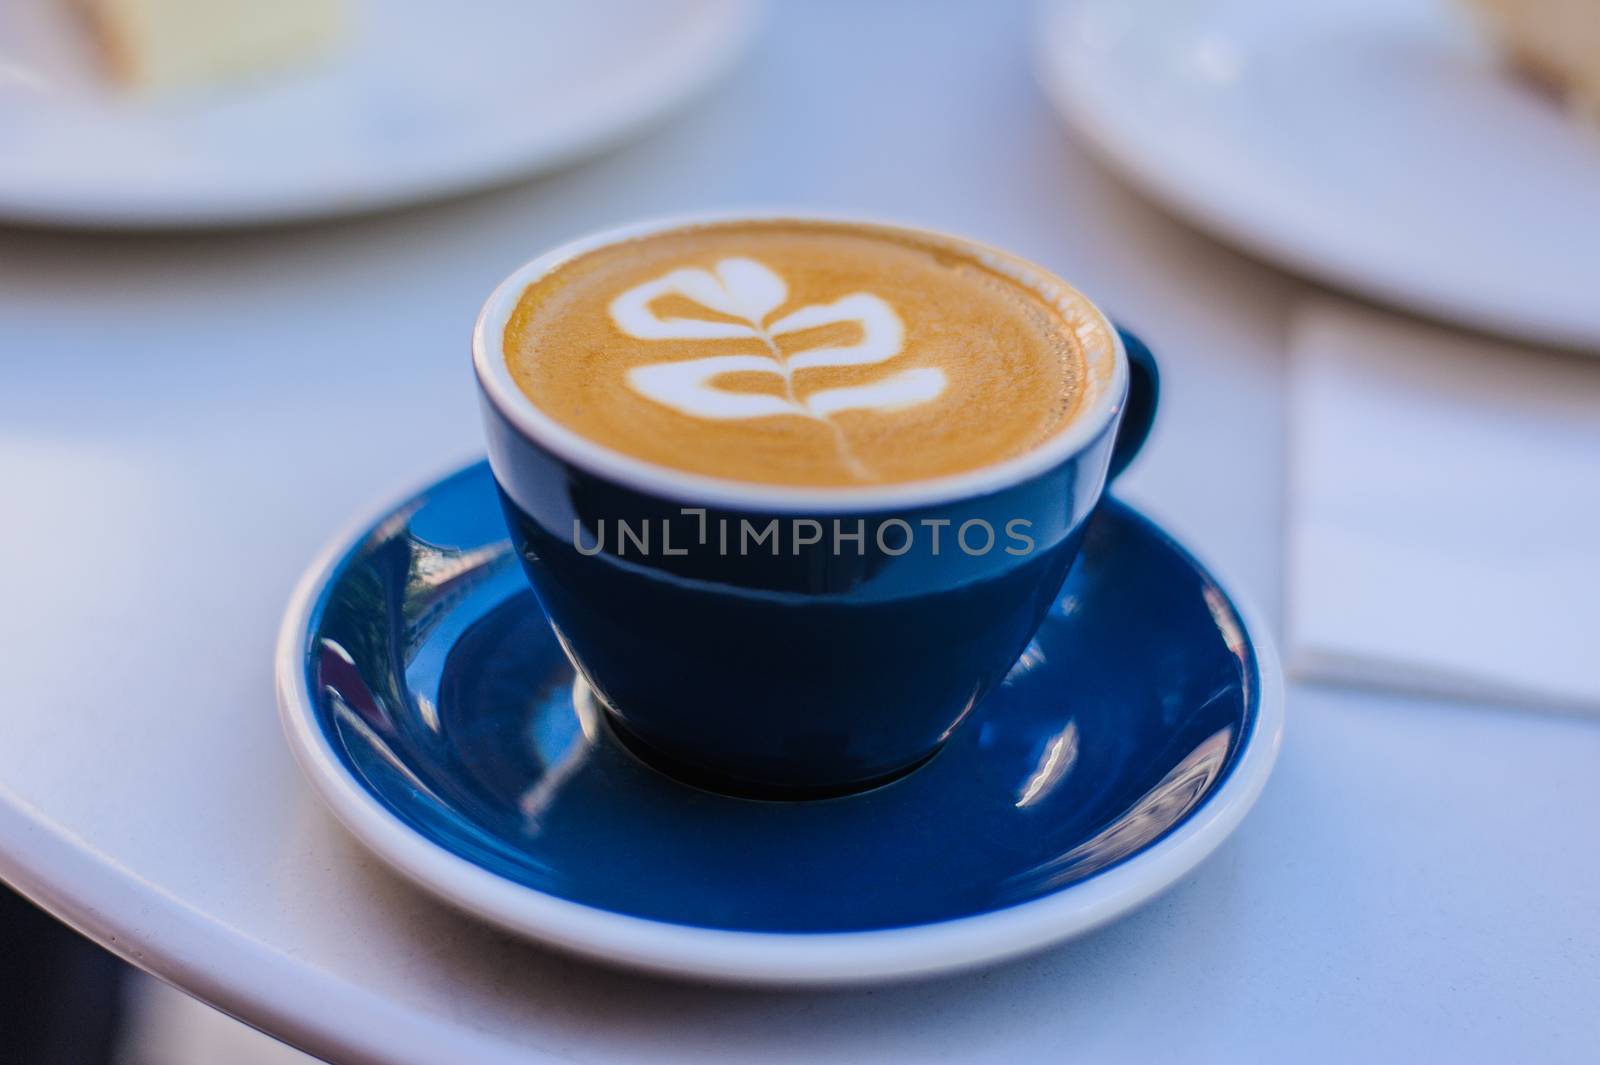 aromatic coffee cappuccino in a blue cup on a saucer stands on a white table